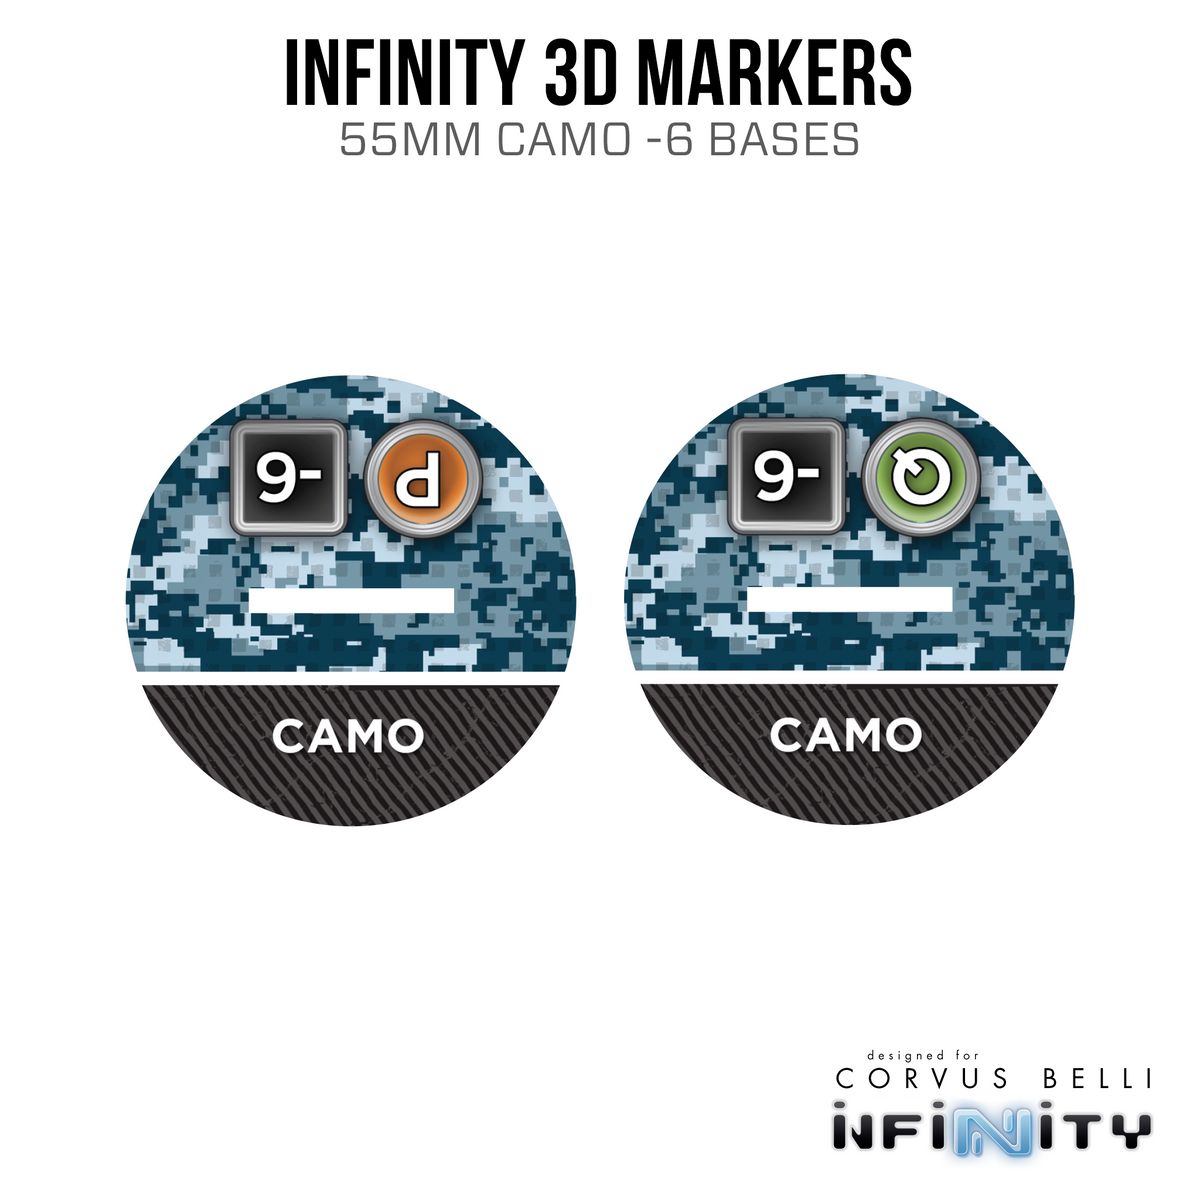 Infinity 3D Markers: Cutter (55mm Camo -6)